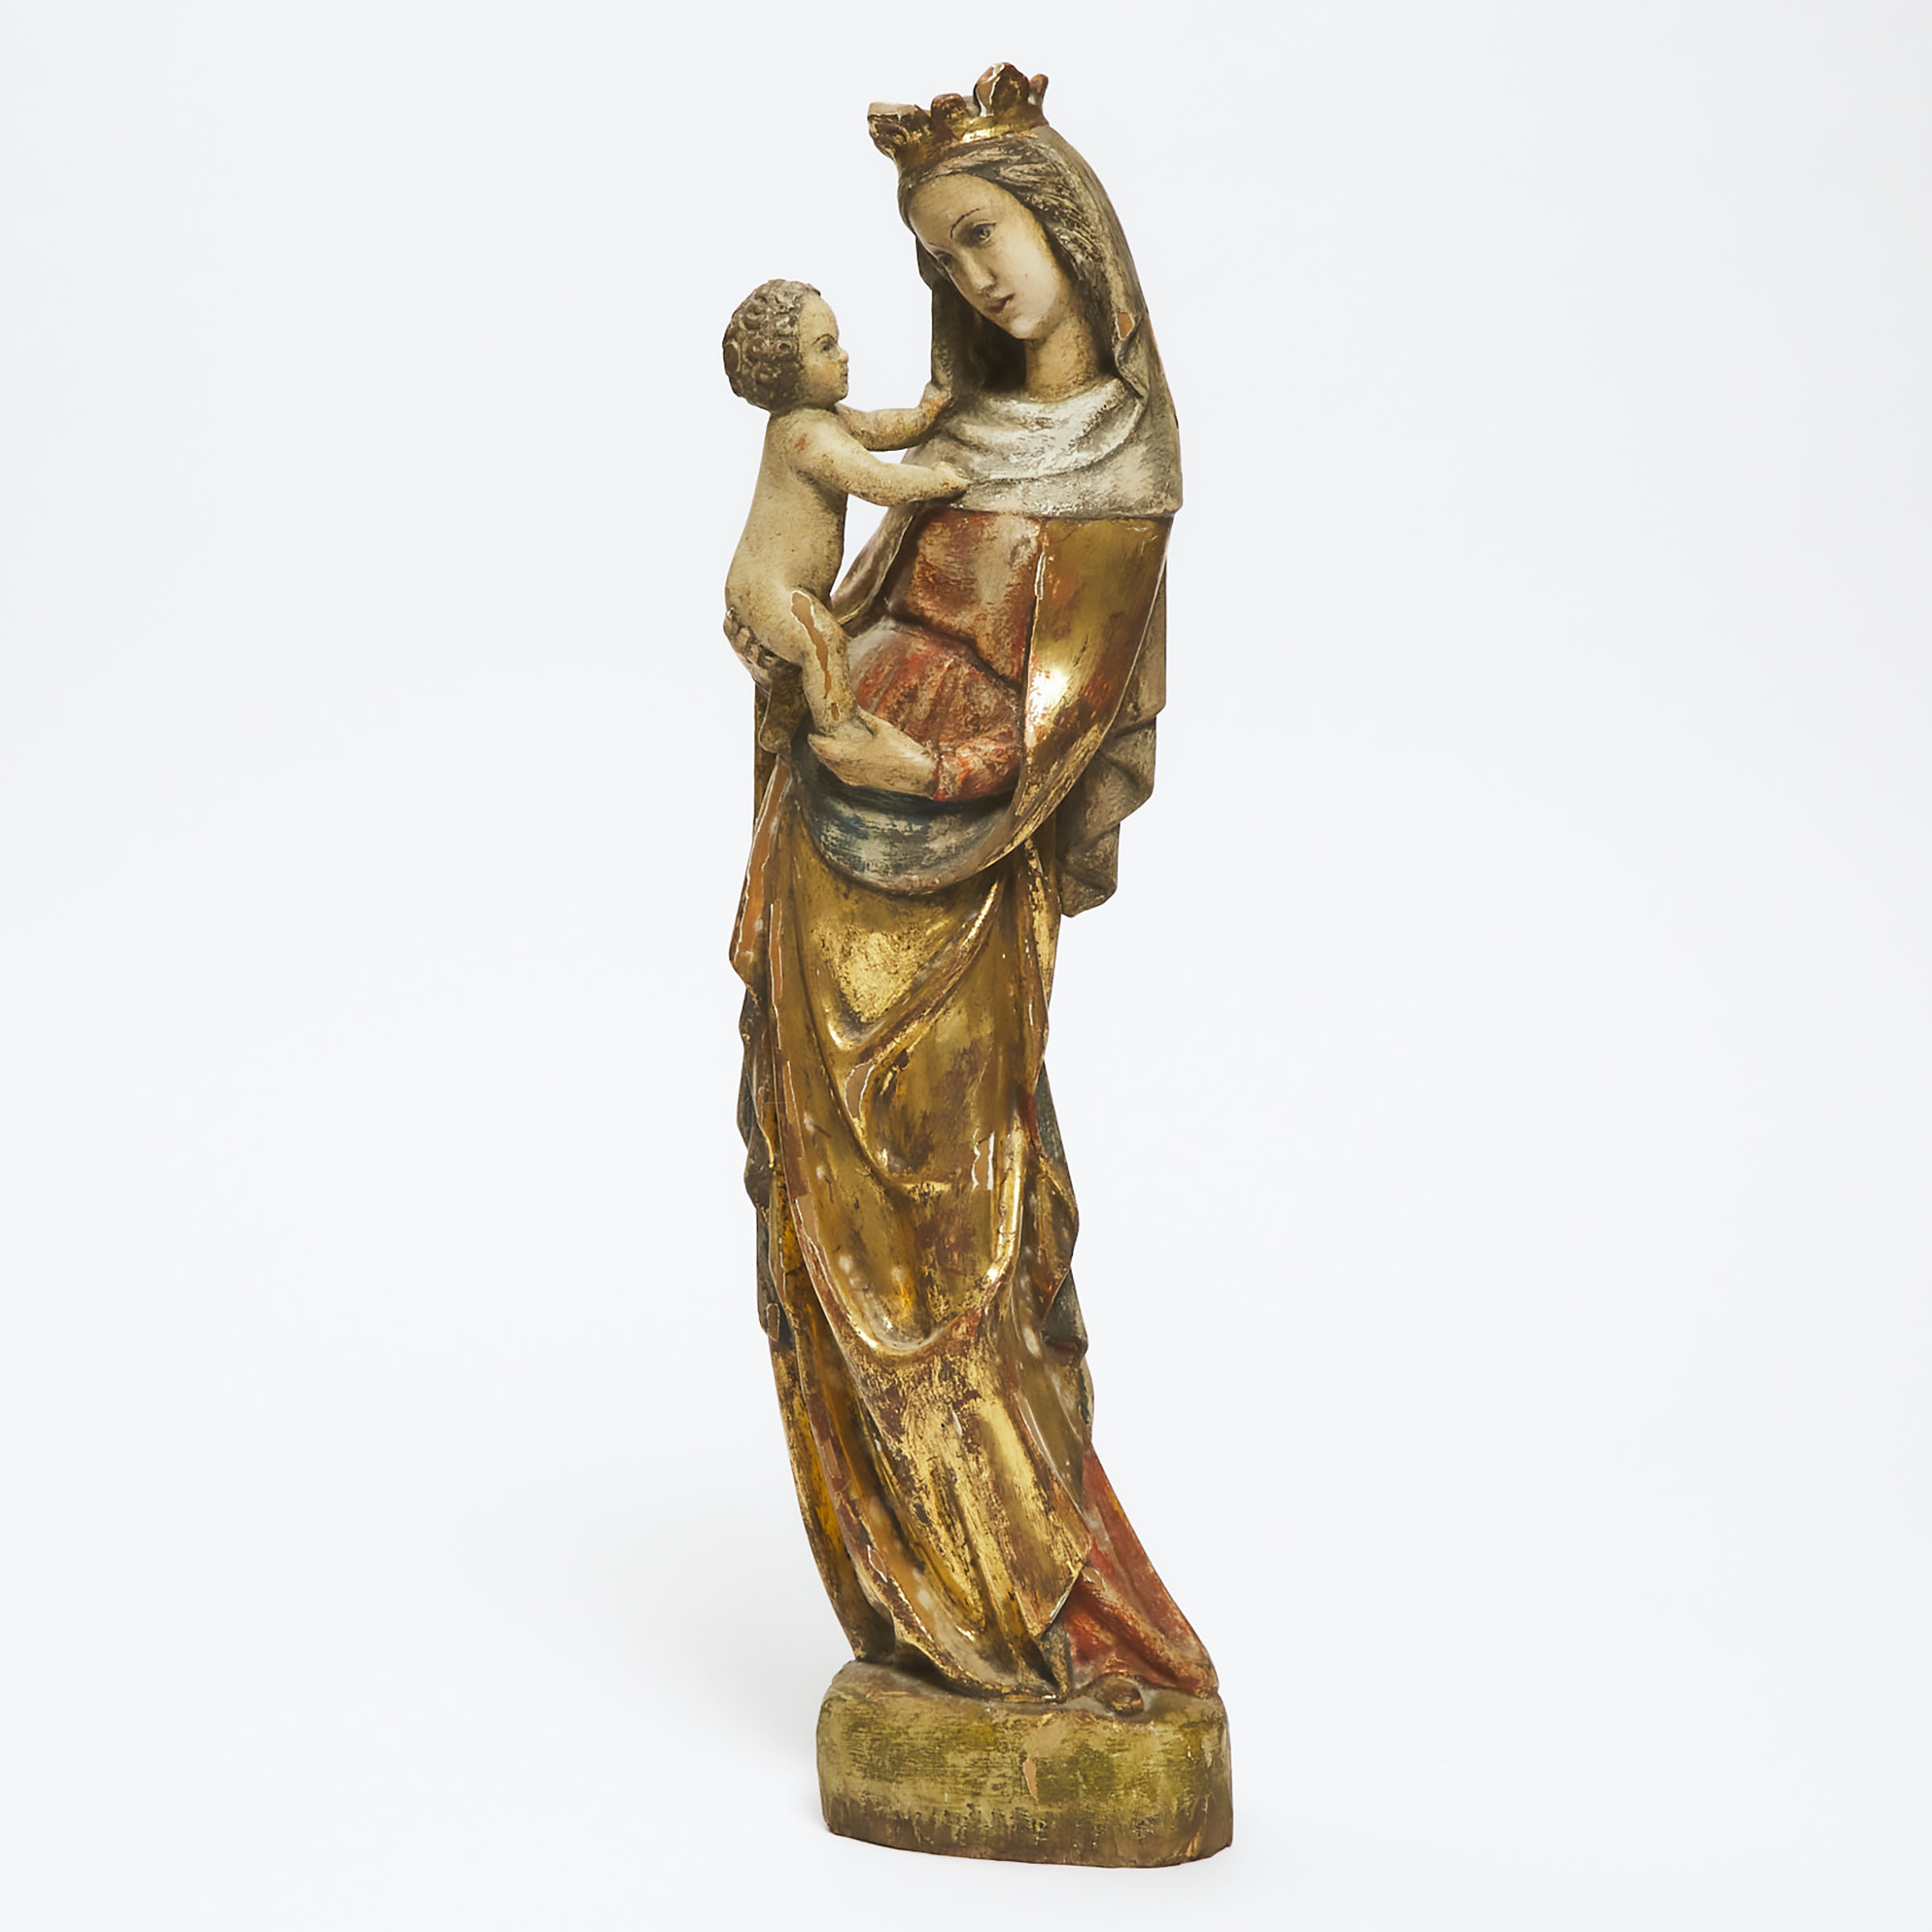 Gothic Style Carved, Polychromed and Parcel Gilt Group of the Madonna and Child, Josef 'Peppi' Rifesser (Italian, 1921-2020) mid 20th century